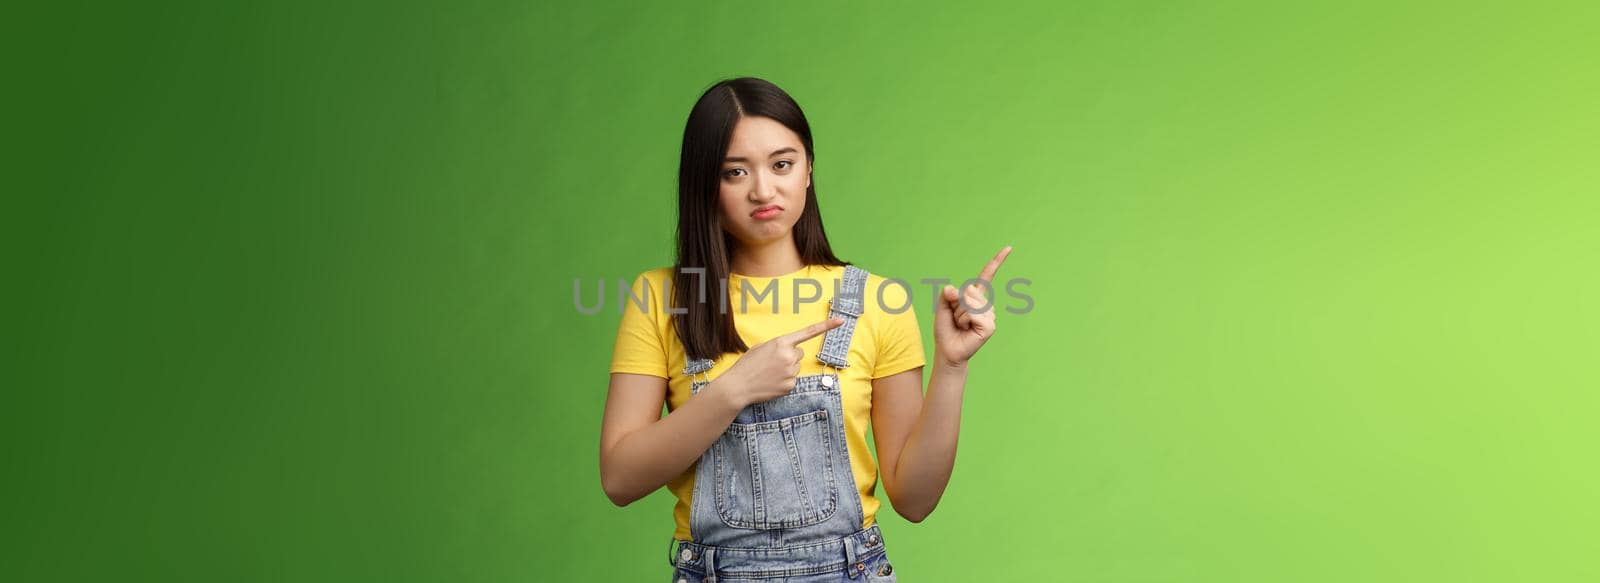 Disappointed uninterested asian gloomy girl pointing fingers left, grimacing sulking displeased, unwilling take part event, stare reluctant unimpressed, pose green background. Copy space